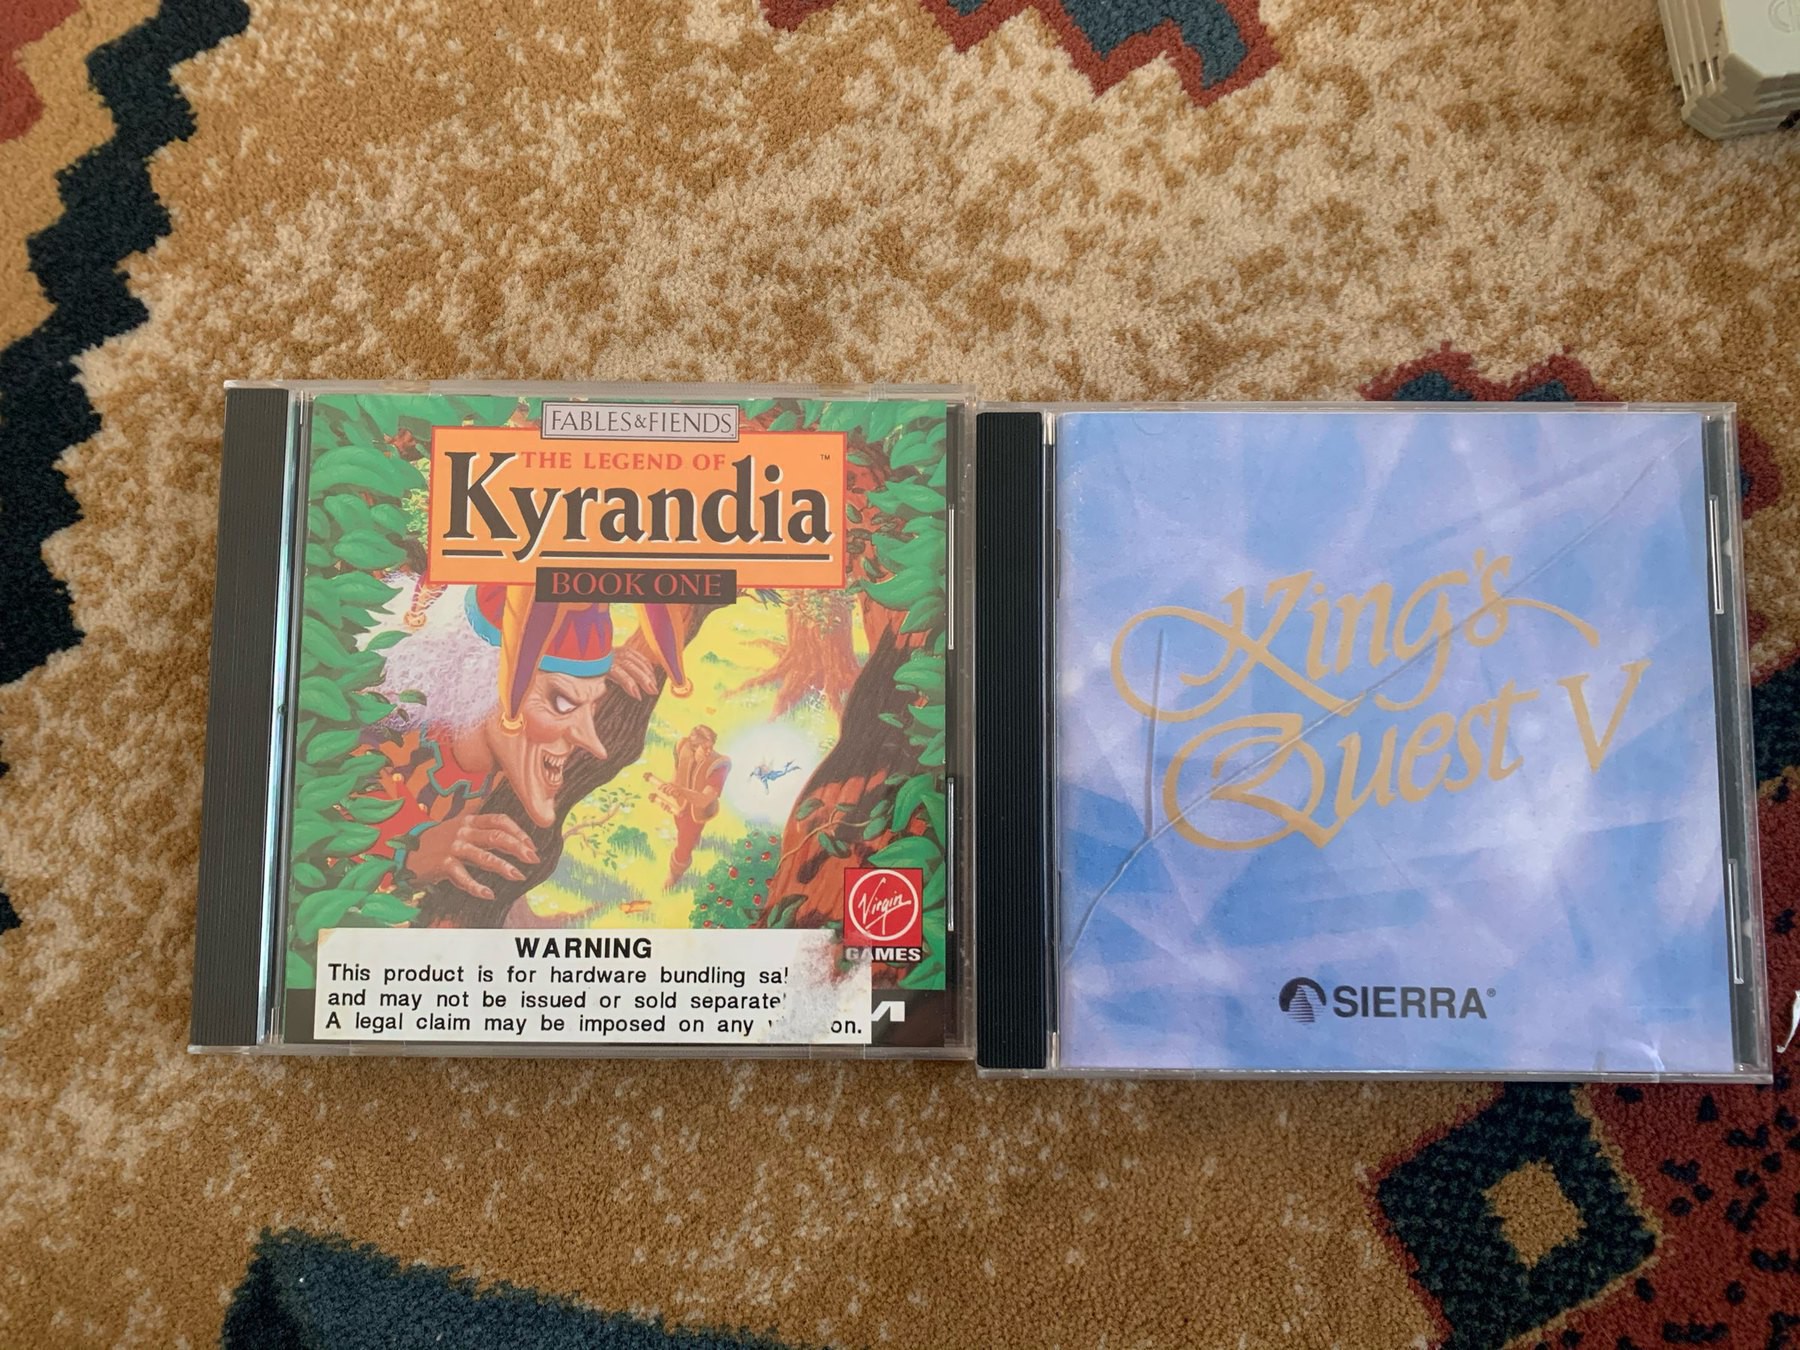 CDs for the games Legend of Kyrandia and Kings Quest V